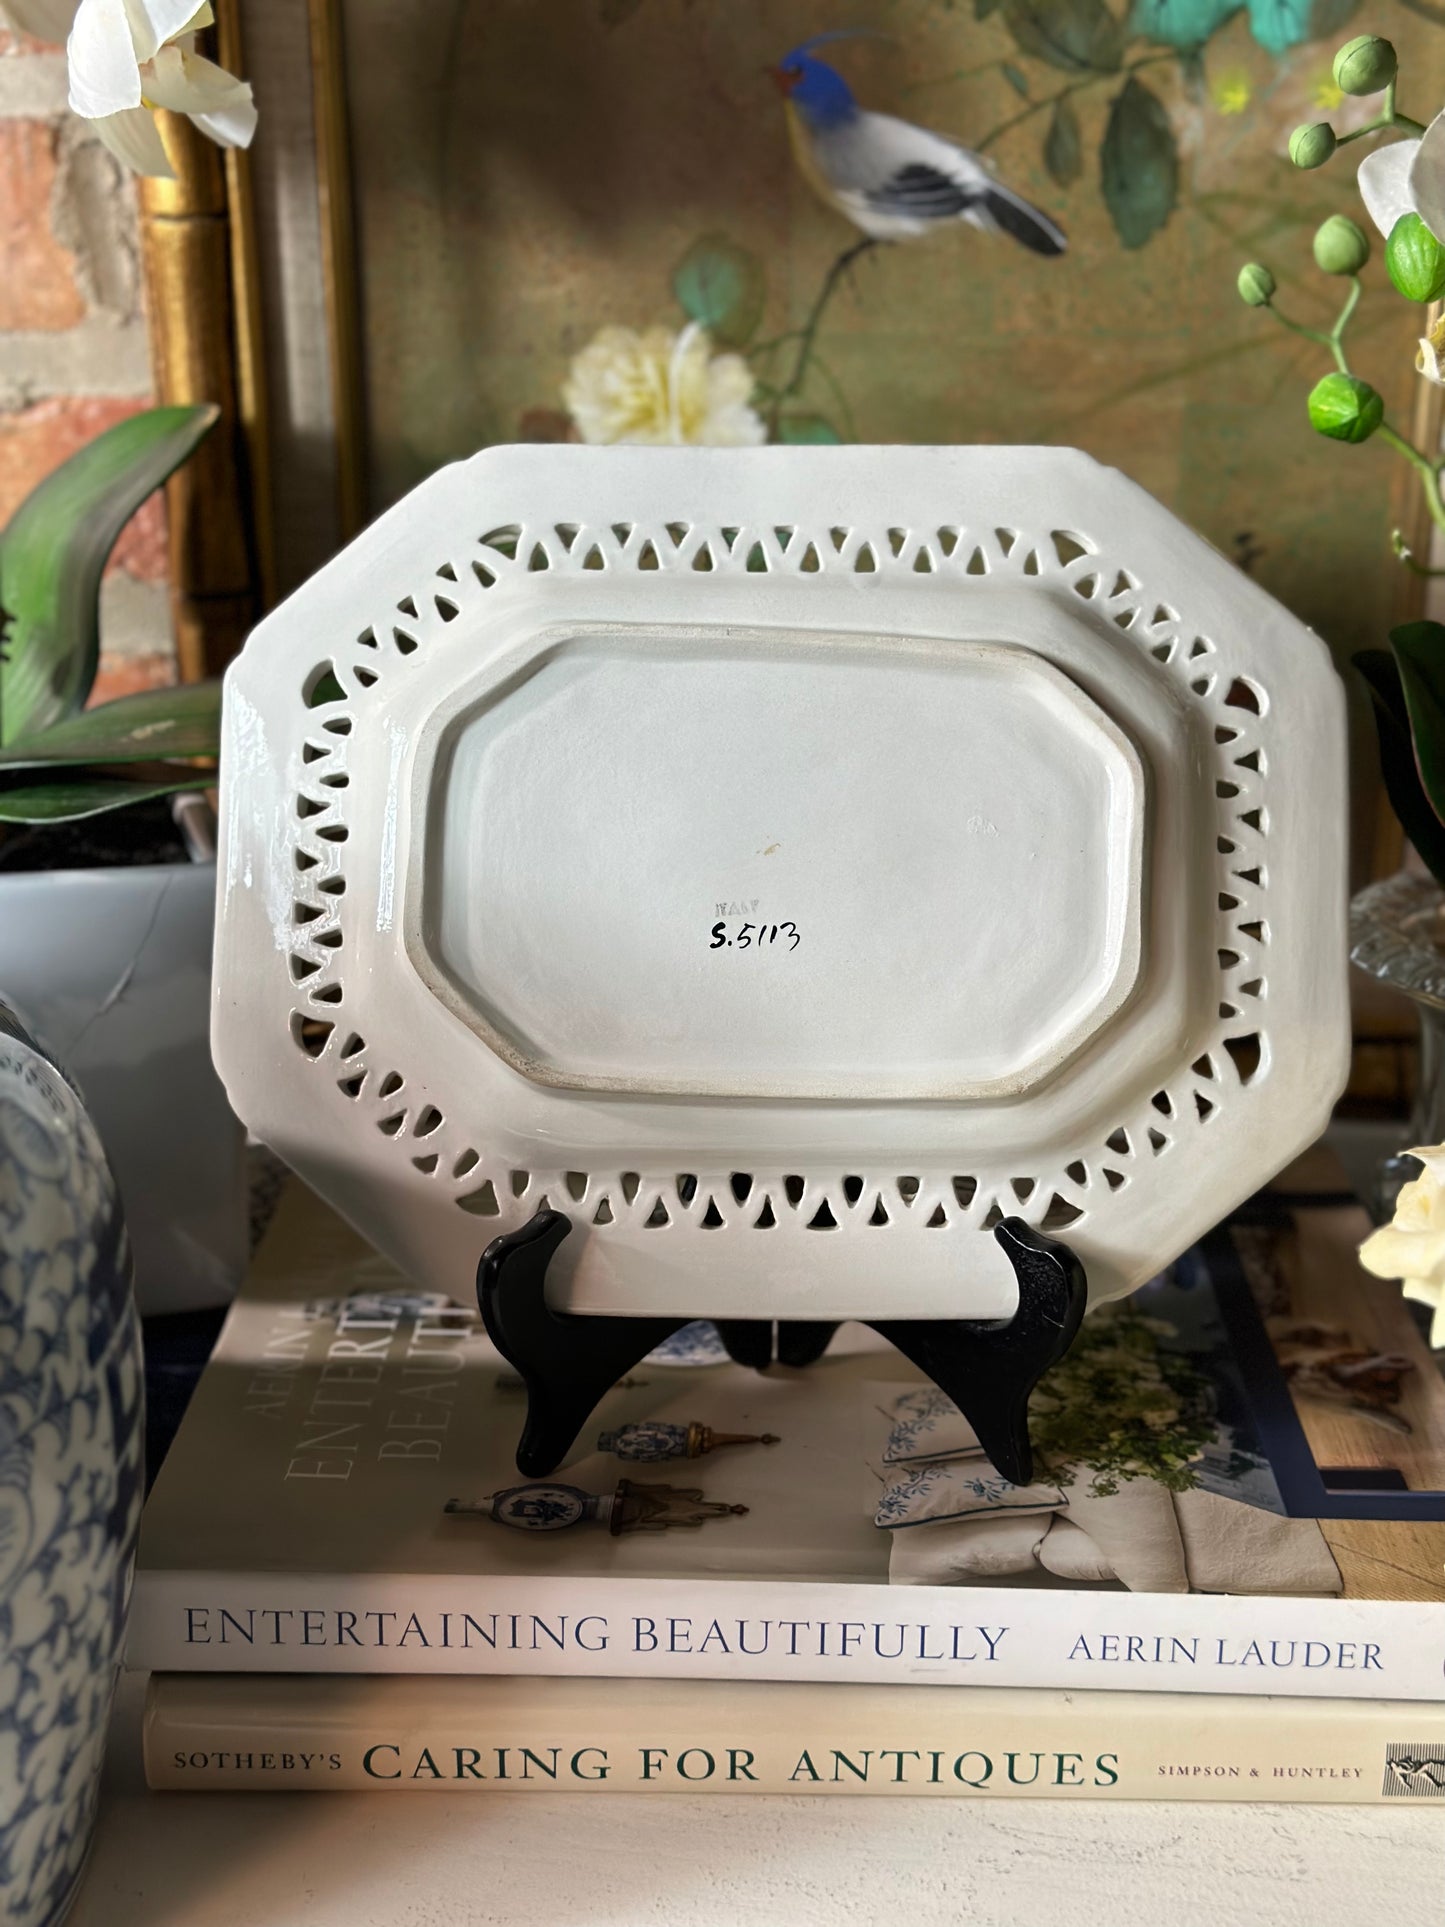 Vintage Black & White Reticulated Platter, Made In Italy, 10x8" - Pristine!